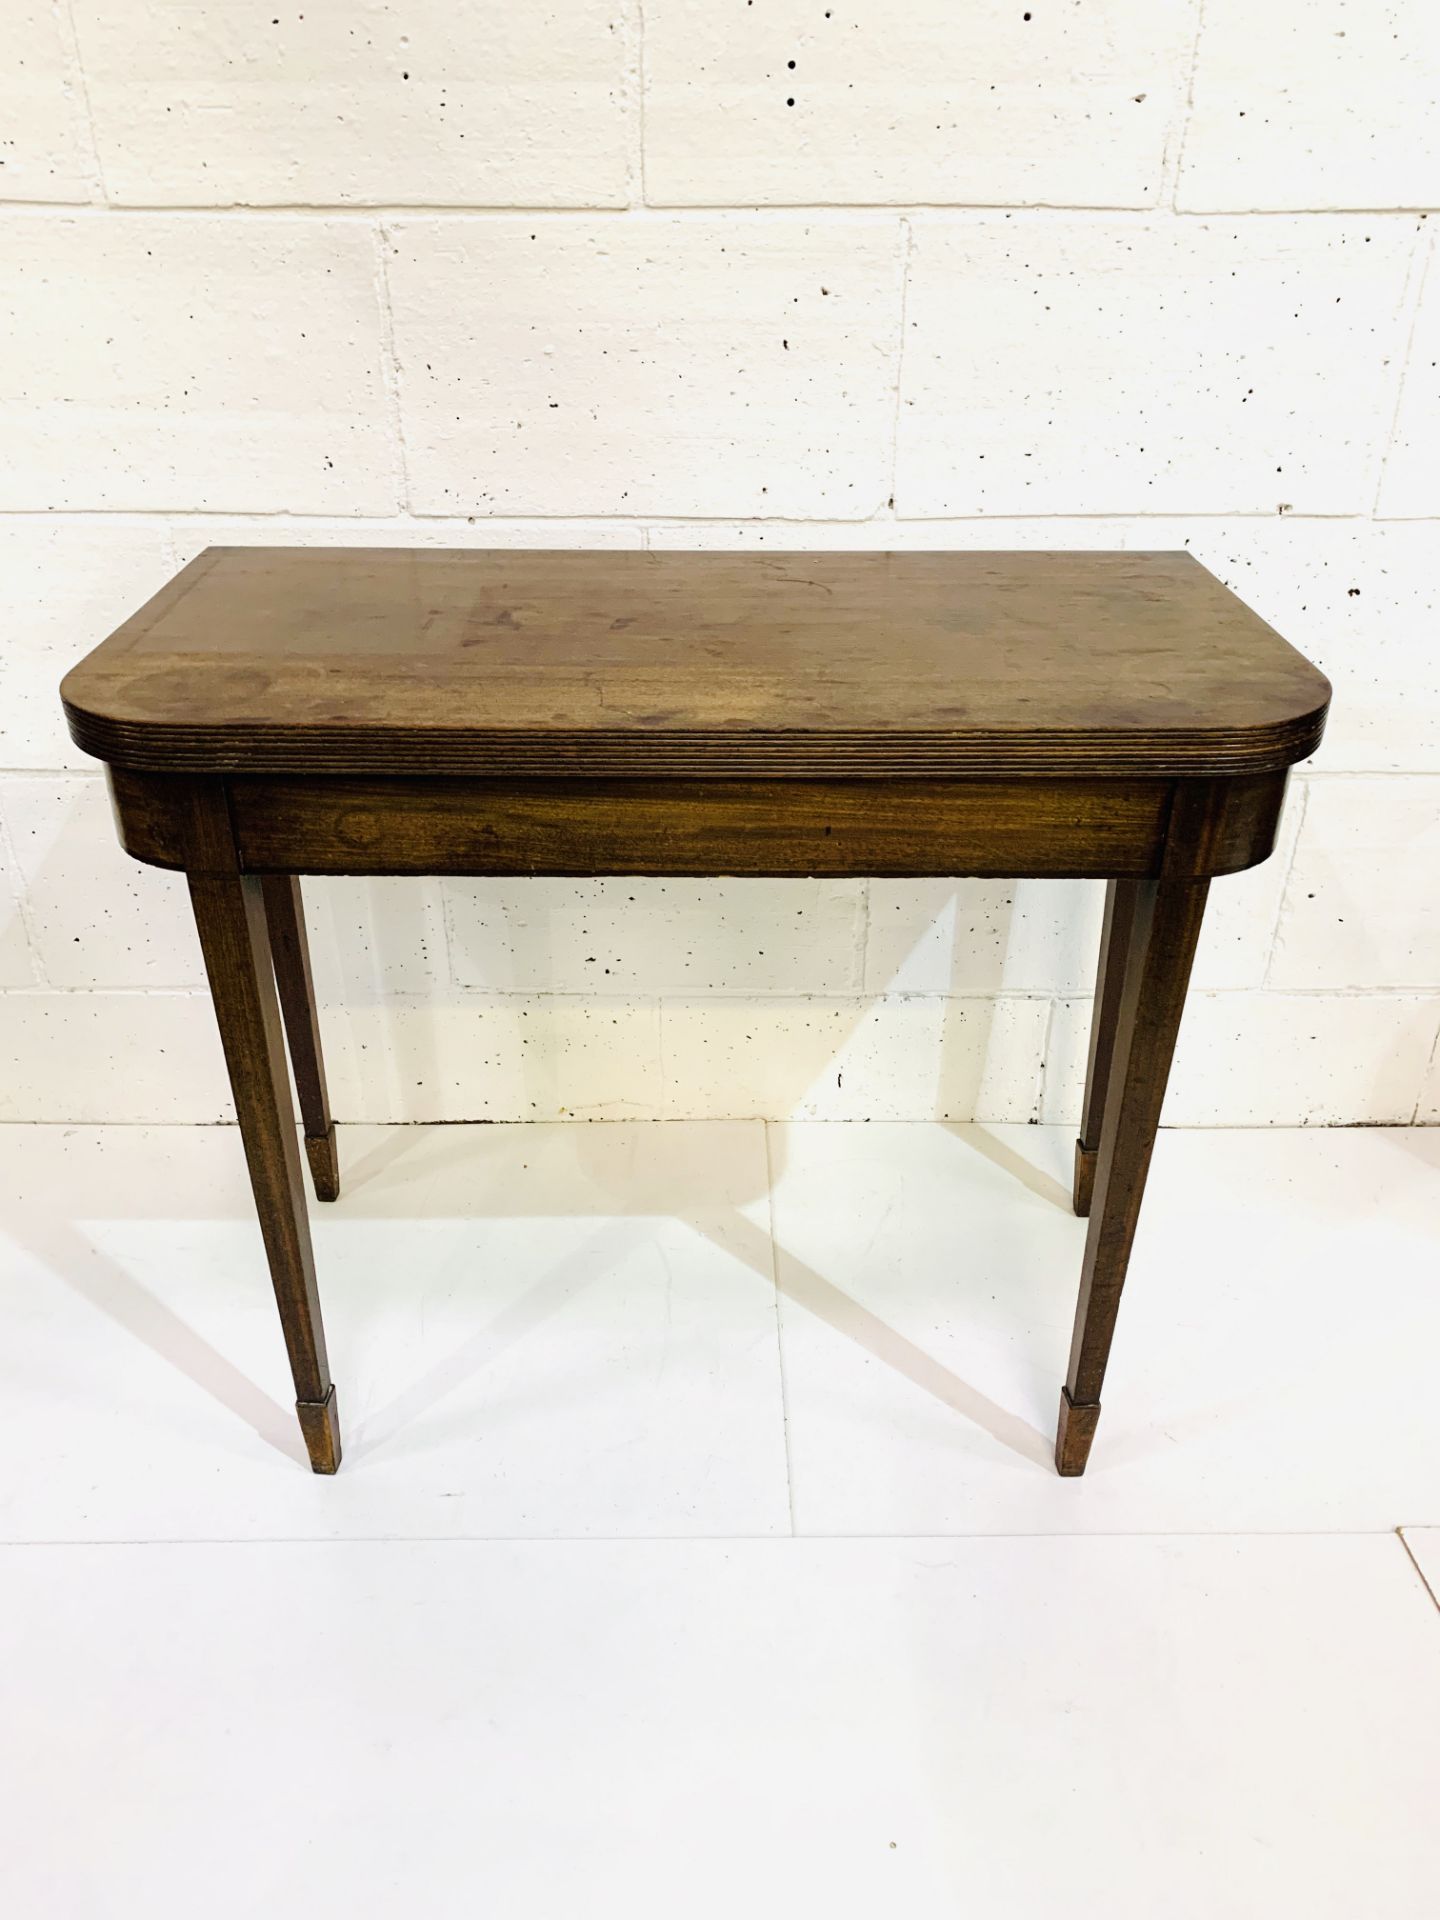 Mahogany gate leg side table with fold over top on tapered legs. - Image 2 of 4